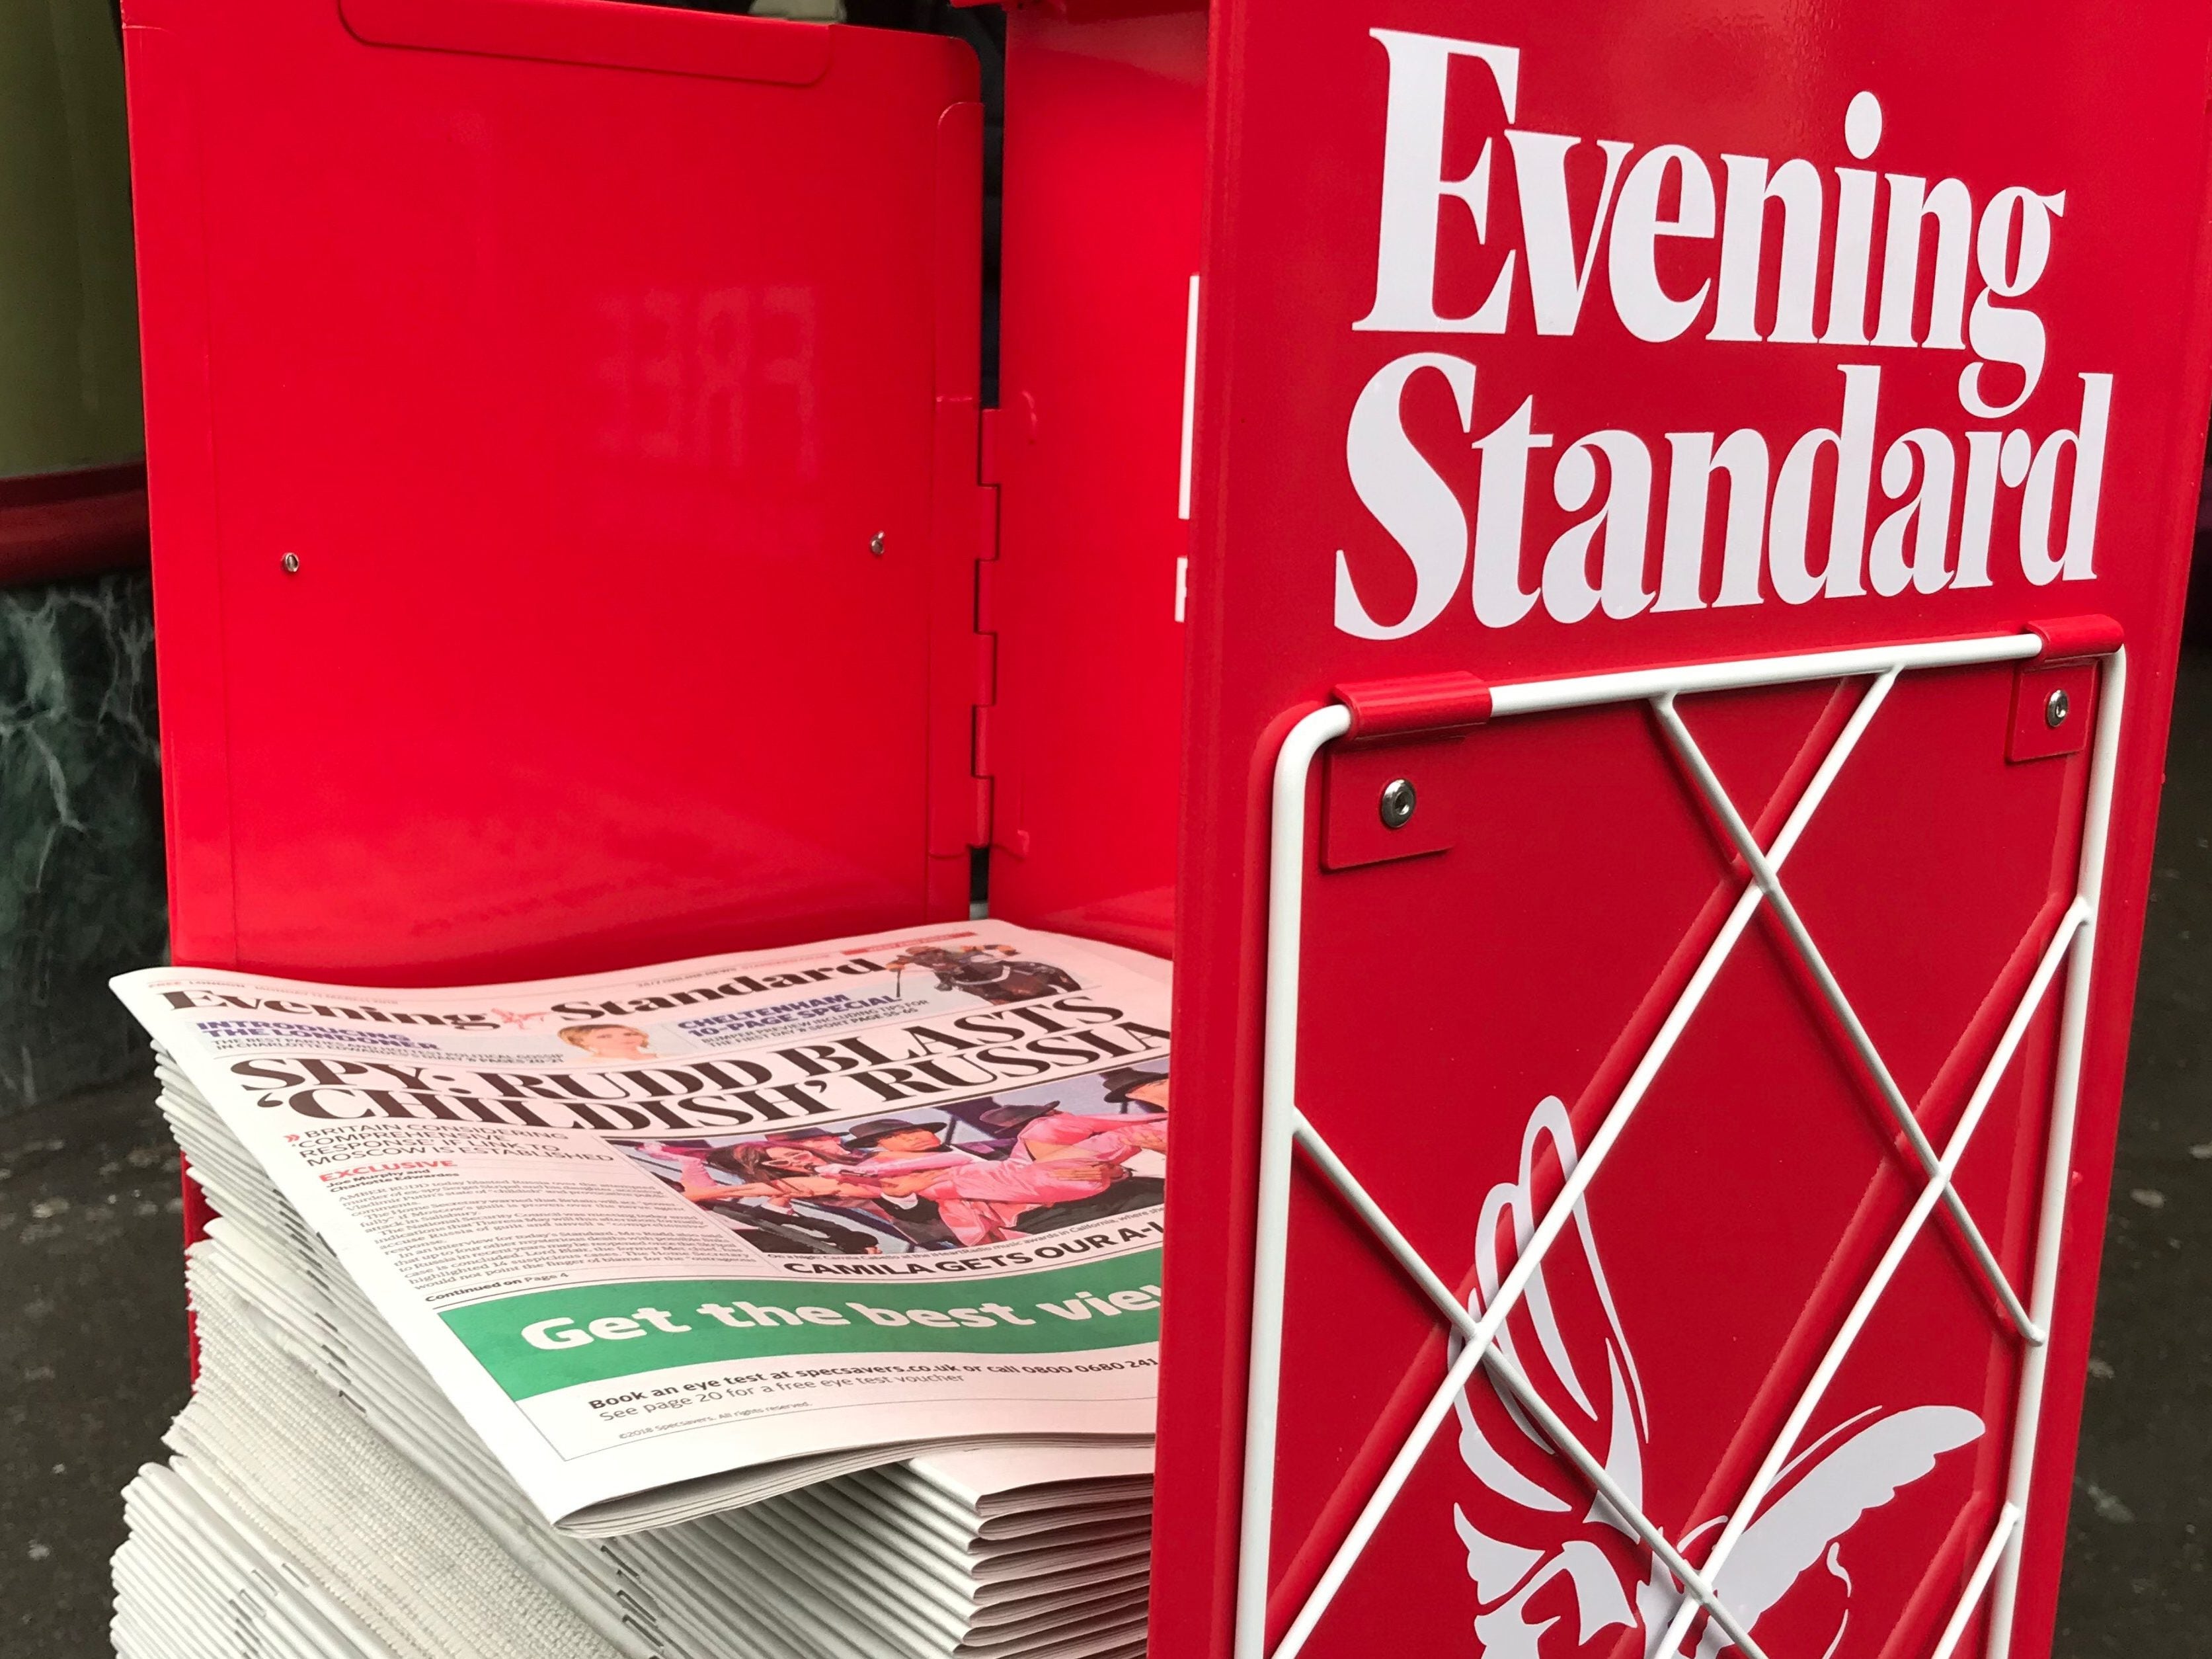 Evening Standard to cut editorial roles in merger of digital and print teams